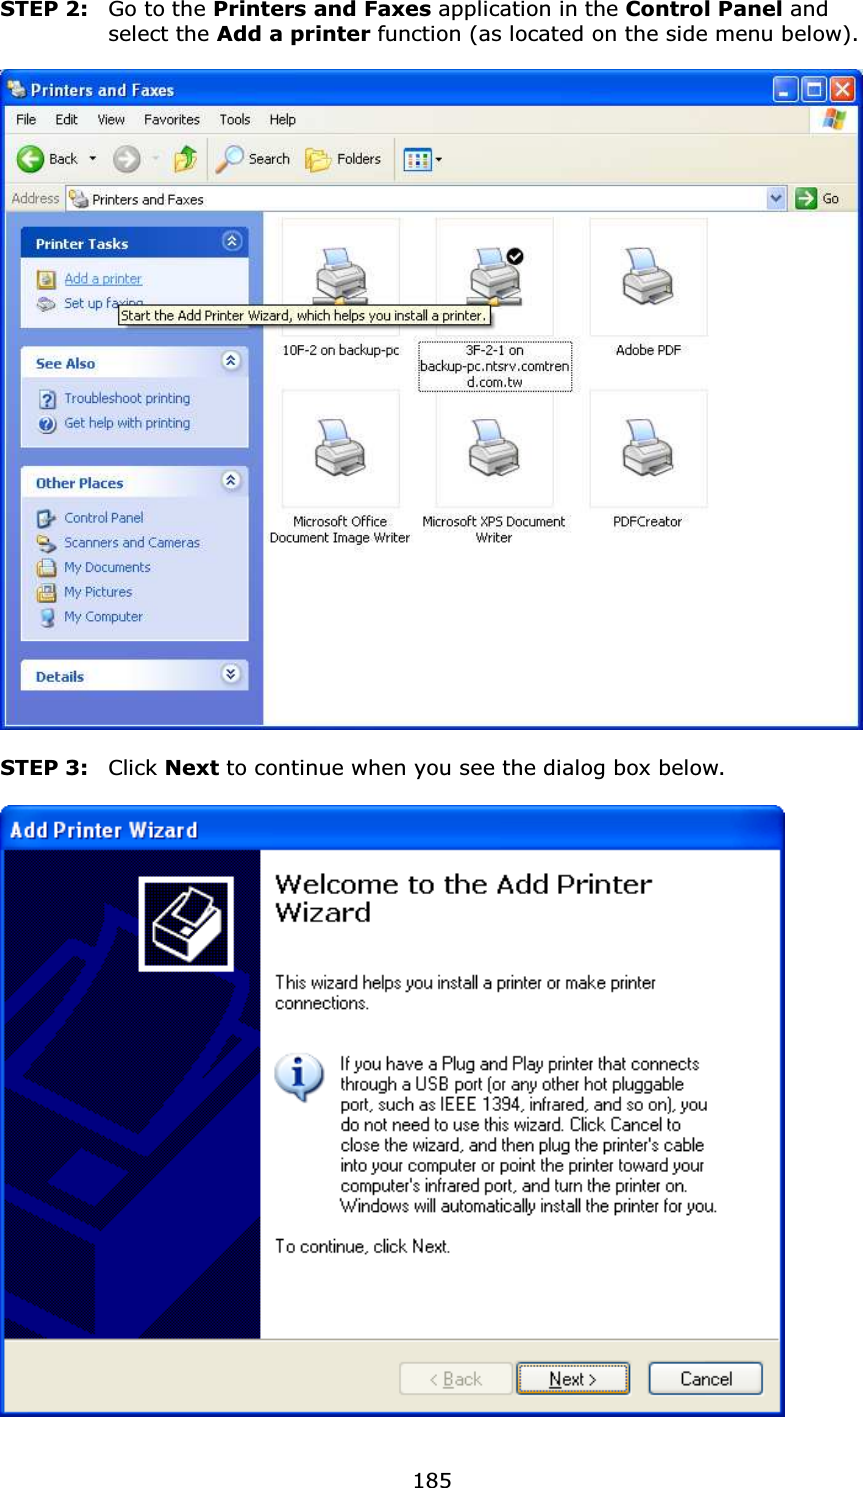  185STEP 2:   Go to the Printers and Faxes application in the Control Panel and select the Add a printer function (as located on the side menu below).   STEP 3: Click Next to continue when you see the dialog box below.    